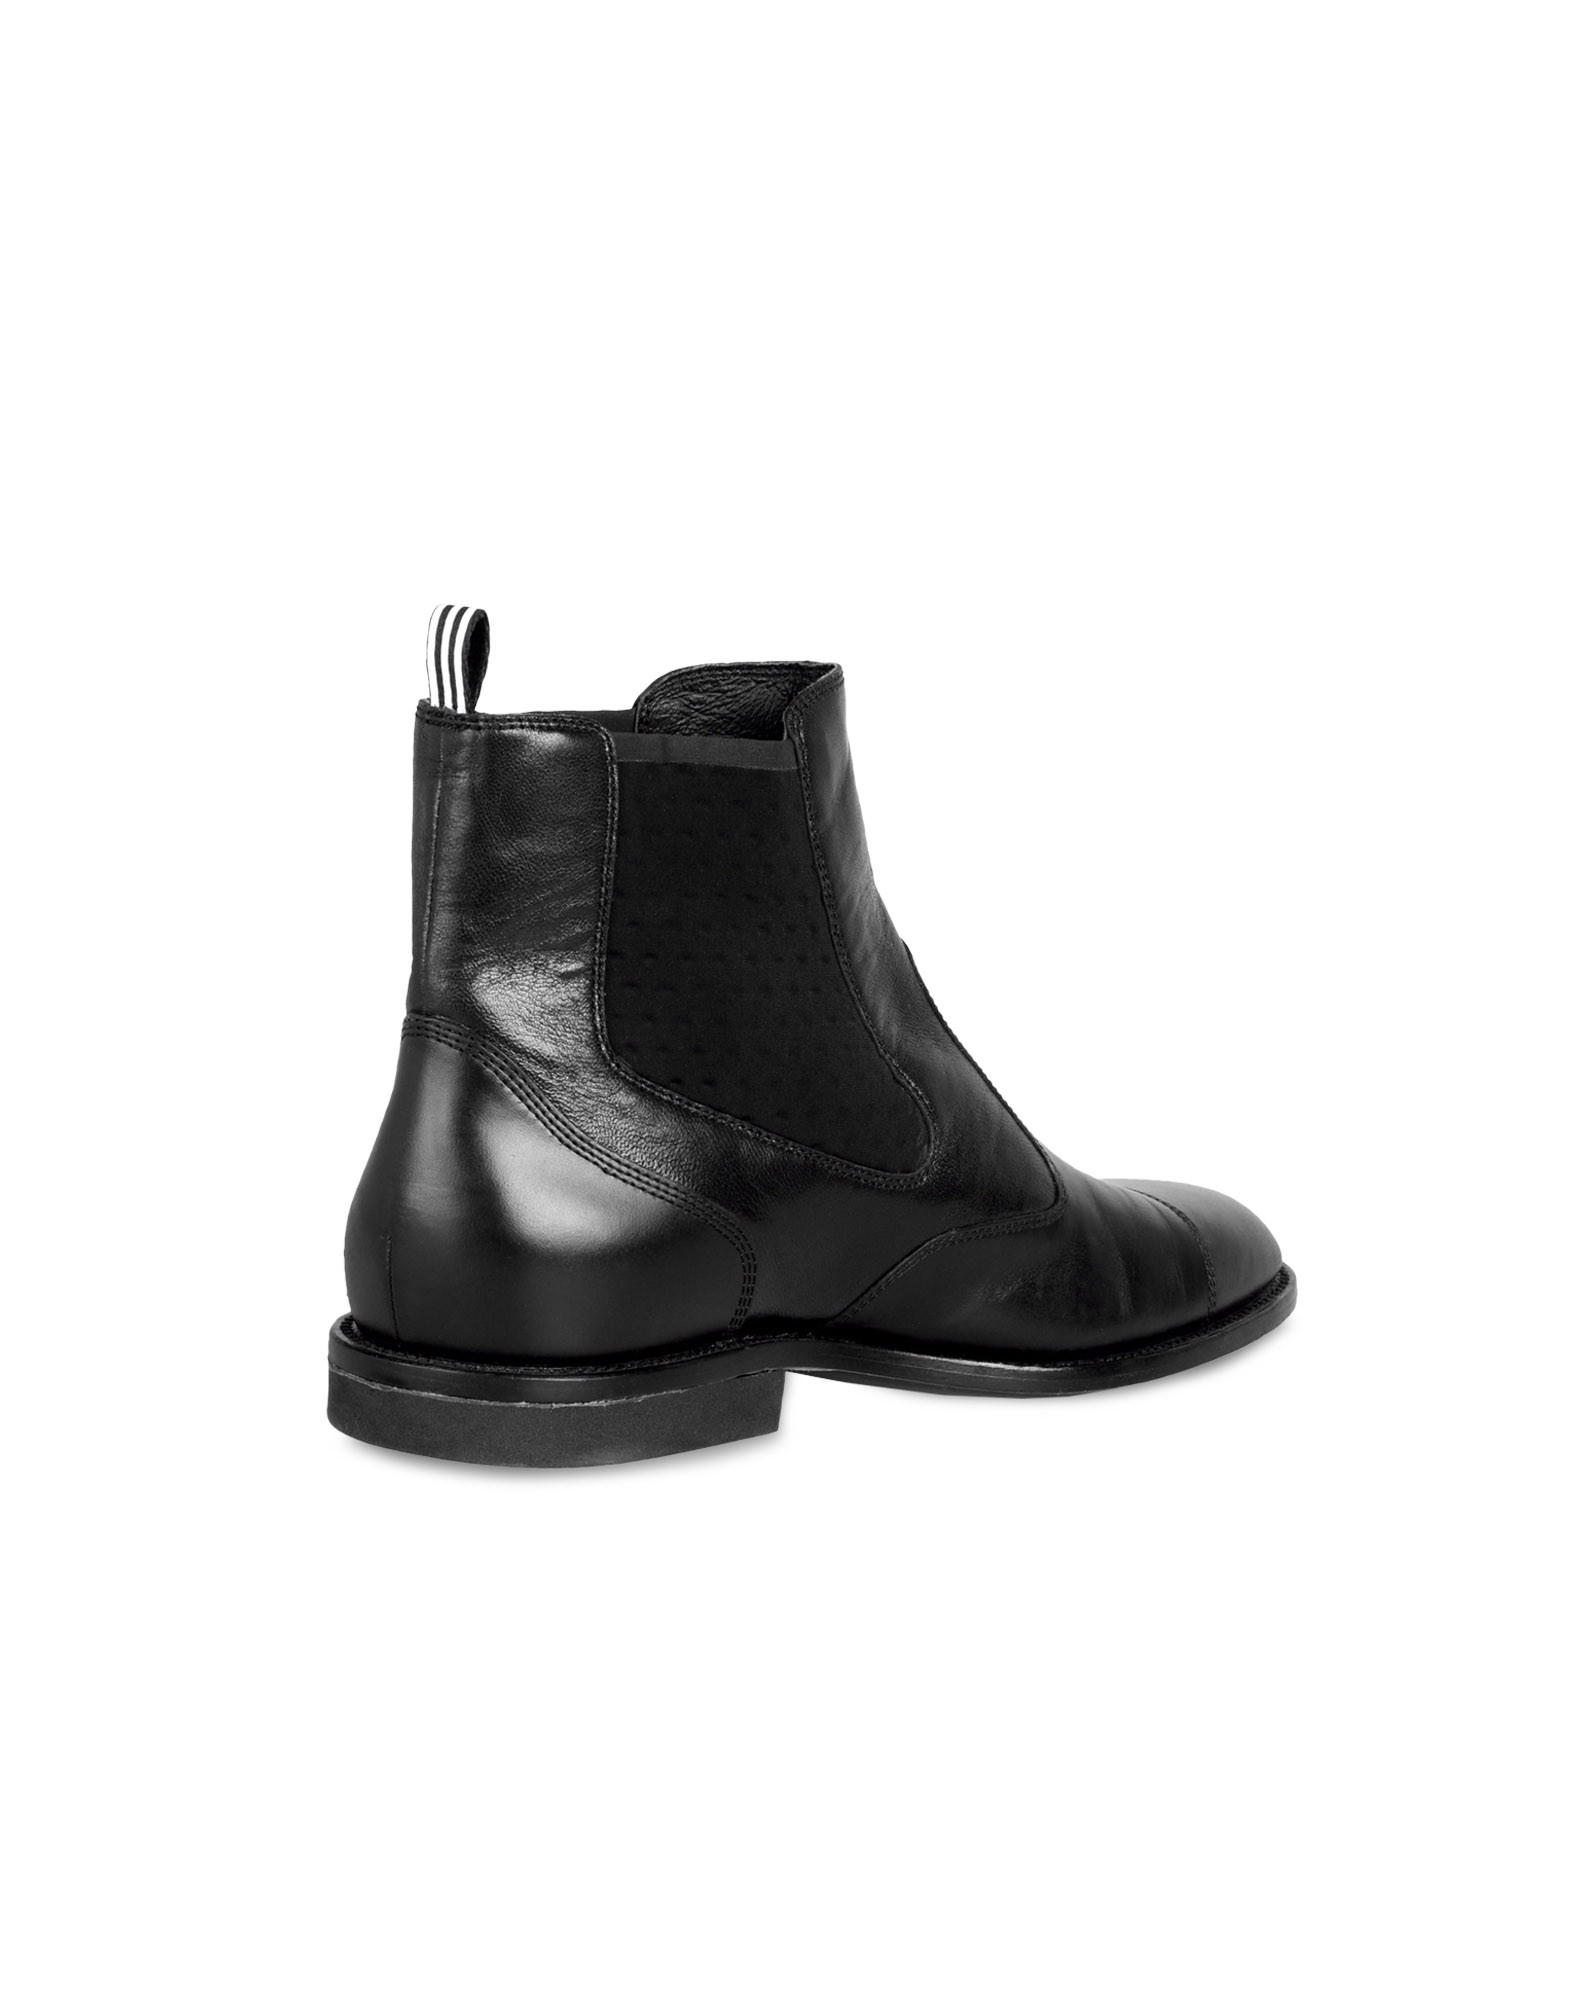 Y 3 Chelsea Boot for Men | Adidas Y-3 Official Store